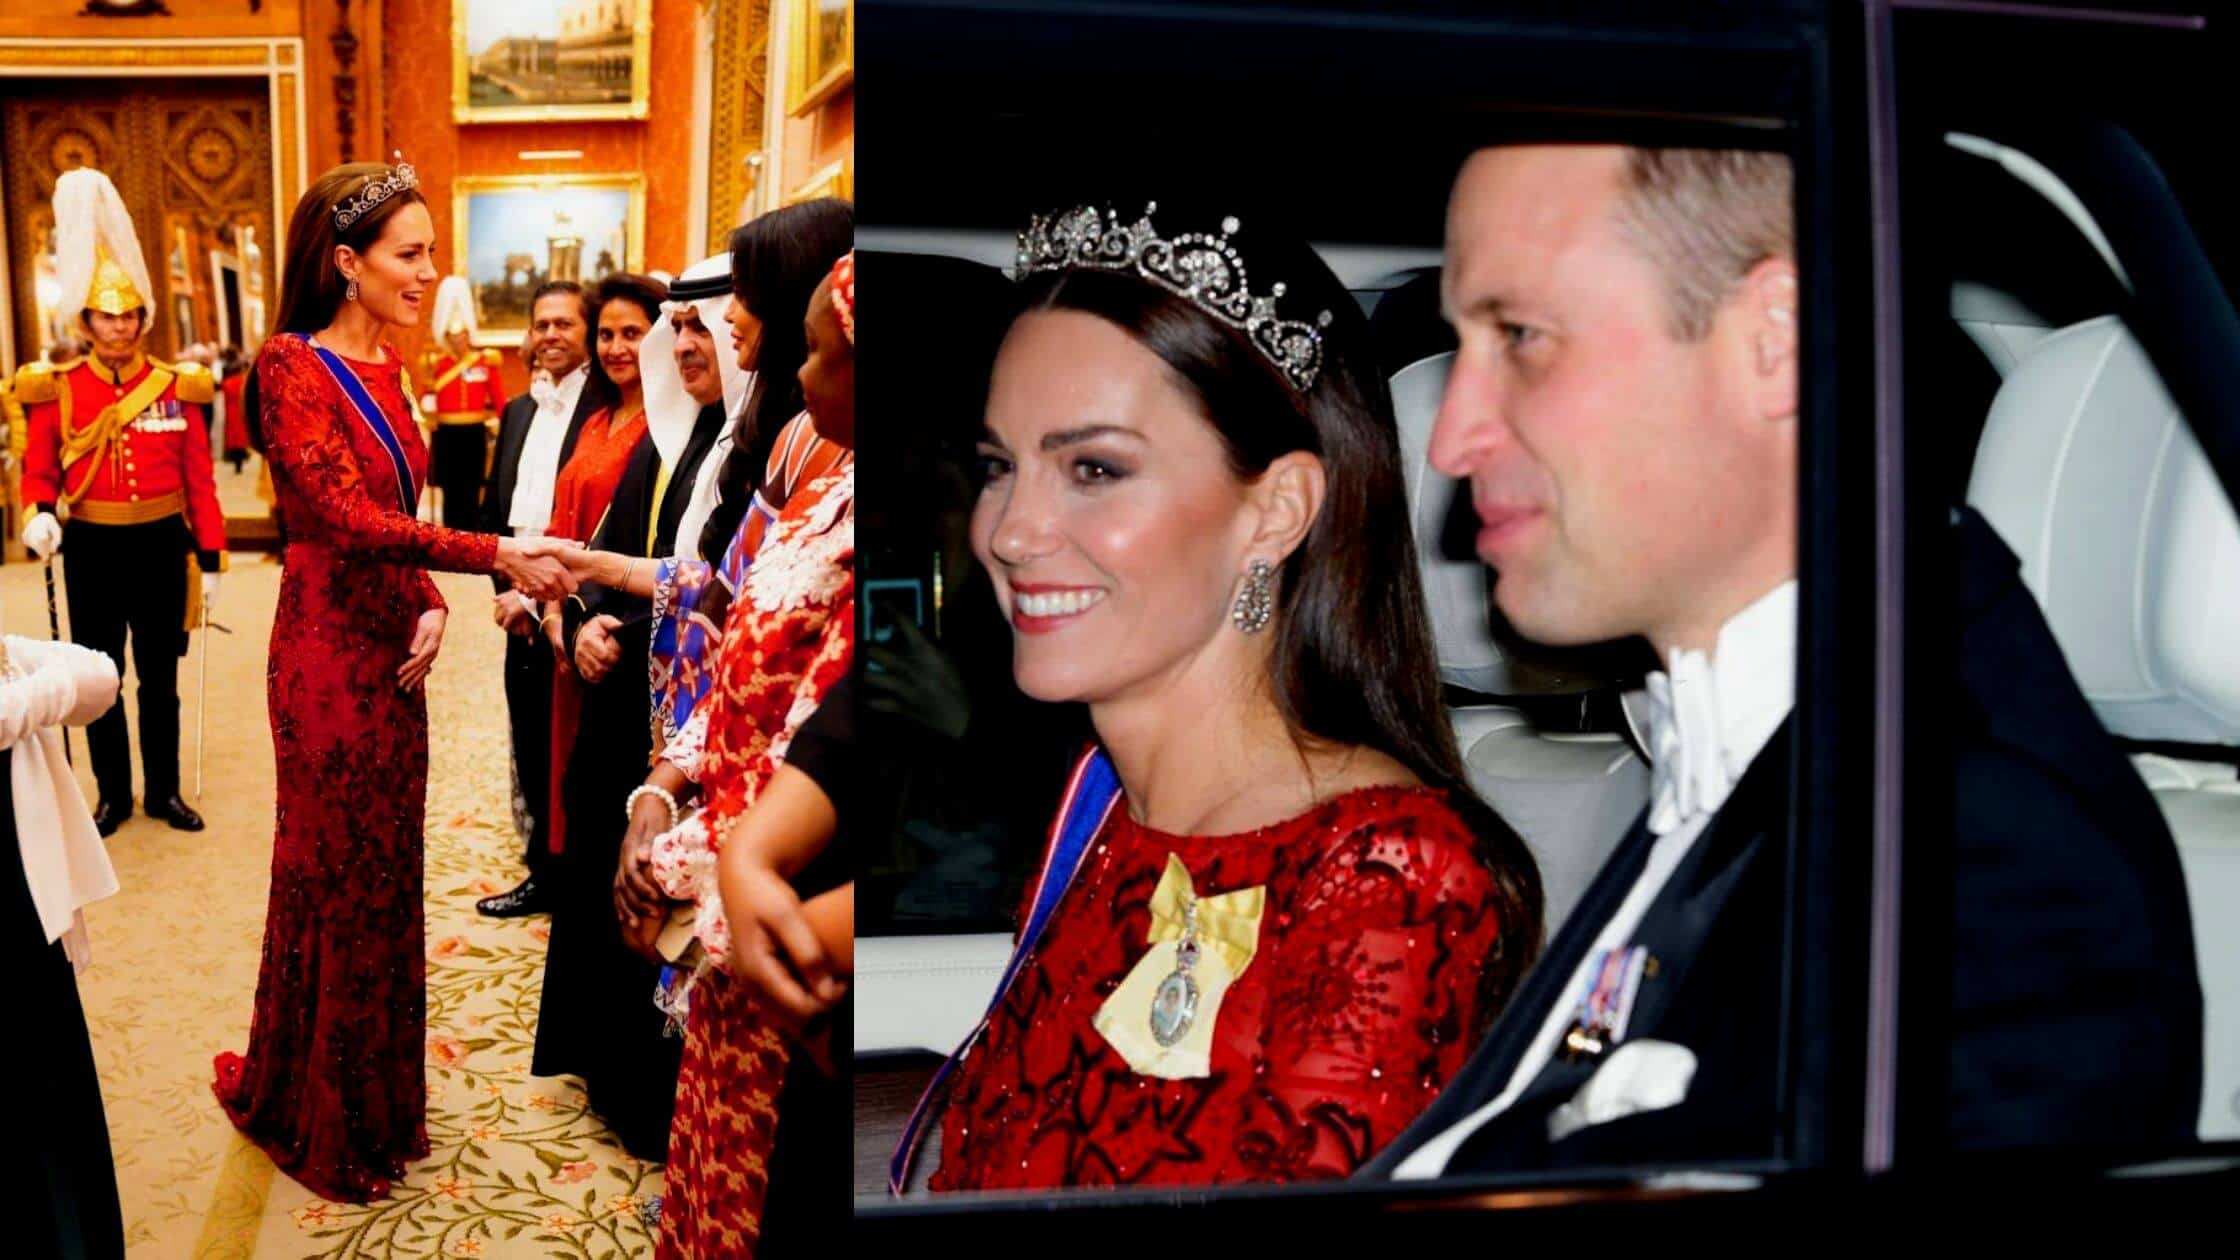 Sensational Appearance Of Kate Middleton At The Diplomatic Corps Reception At Buckingham!